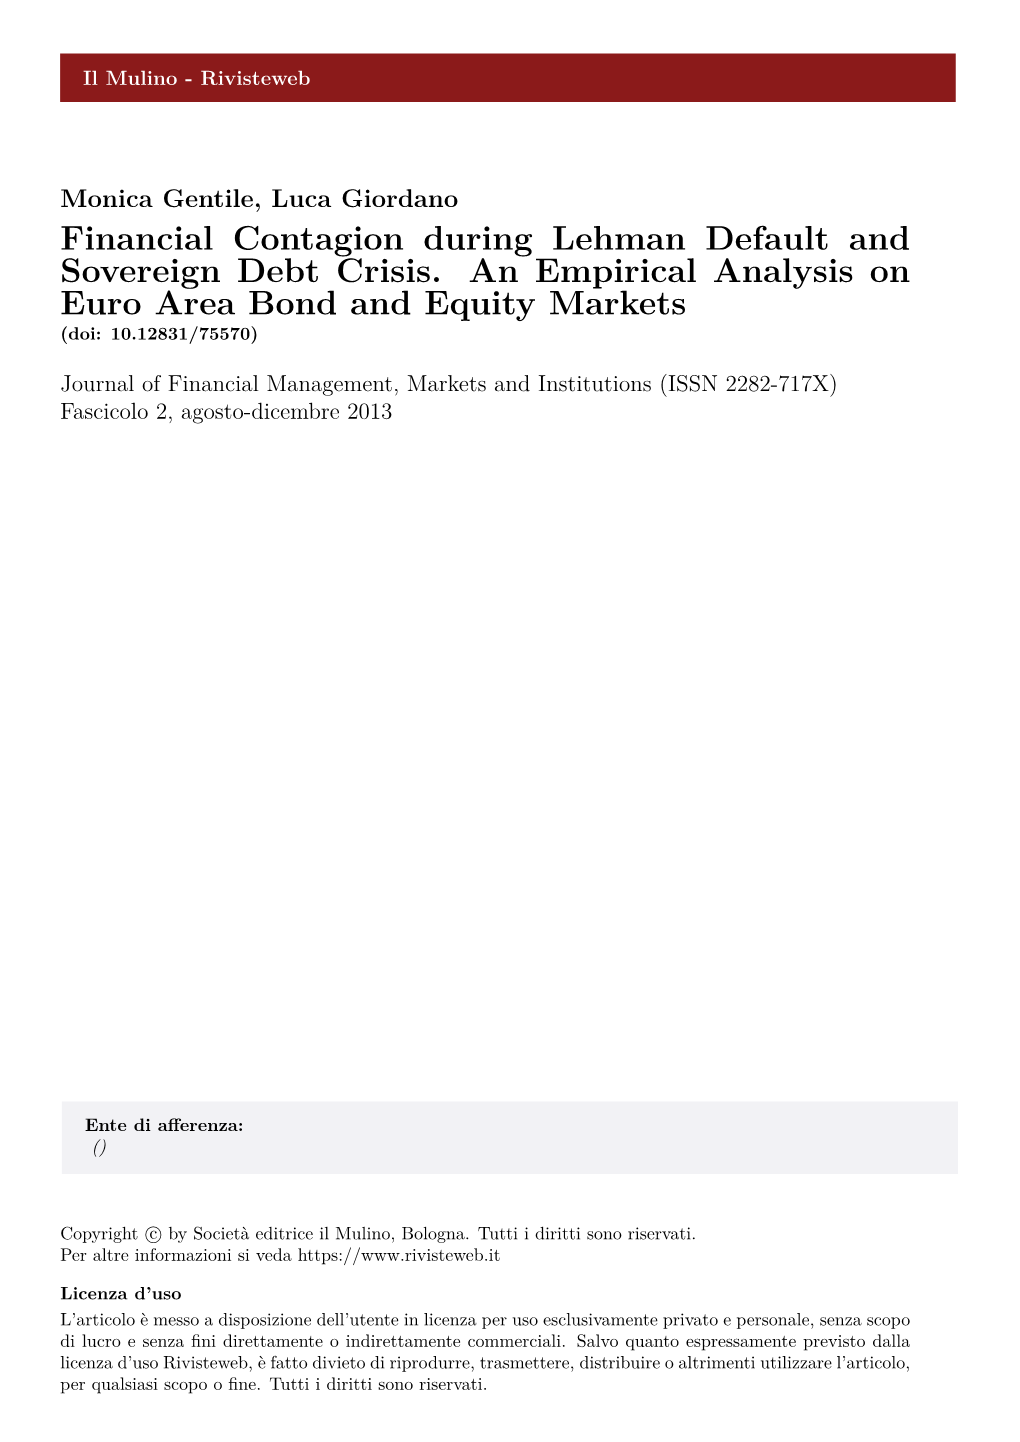 Financial Contagion During the Lehman Brothers Default and Sovereign Debt Crisis an Empirical Analysis on Euro Area Bond and Equity Markets